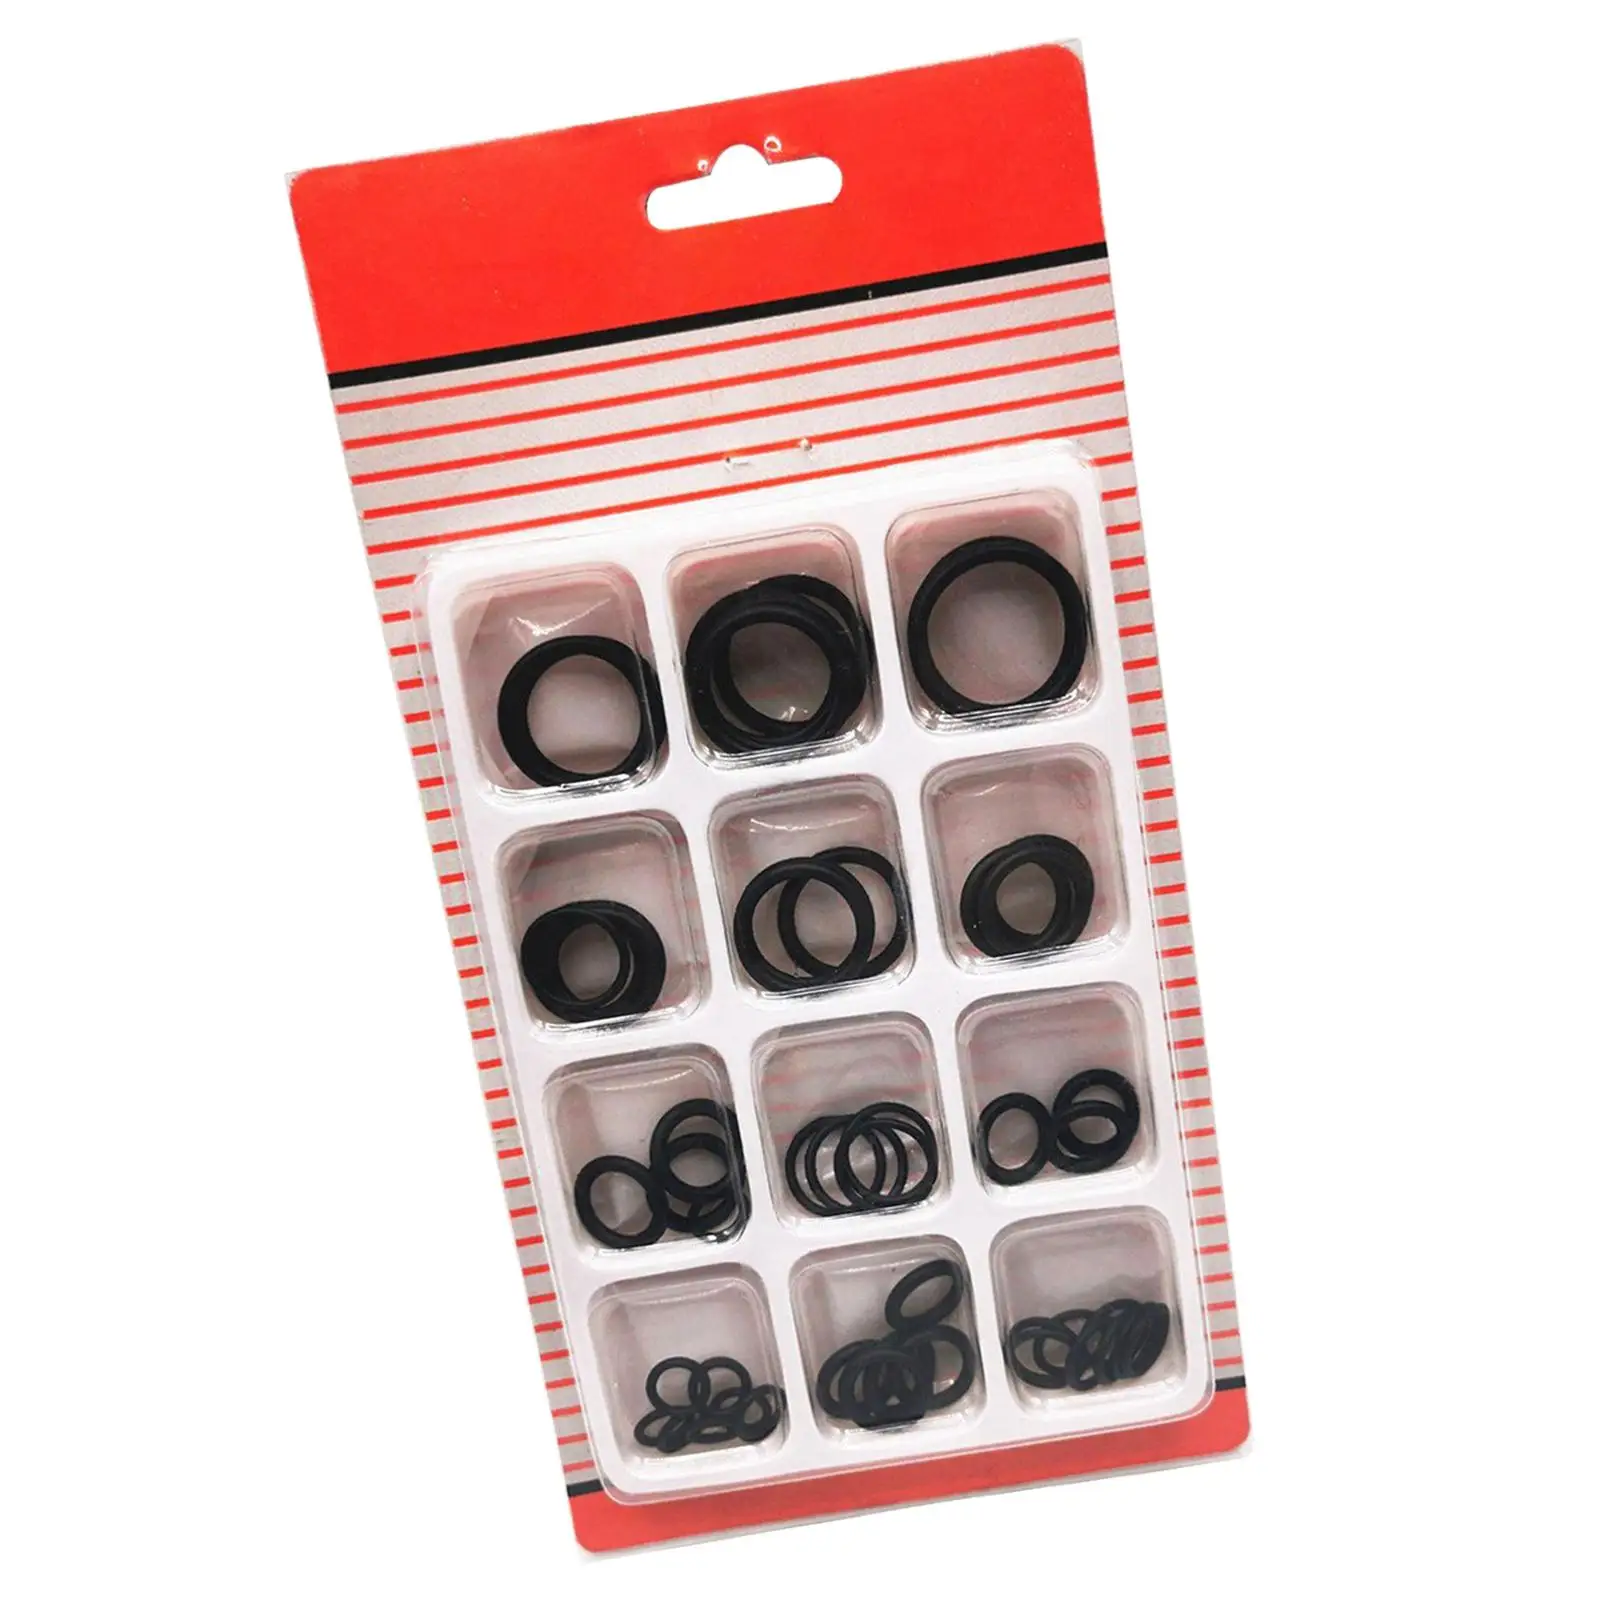 50 Pieces Universal Rubber O Rings Assorted Kit Different Sizes Spacer for Hose